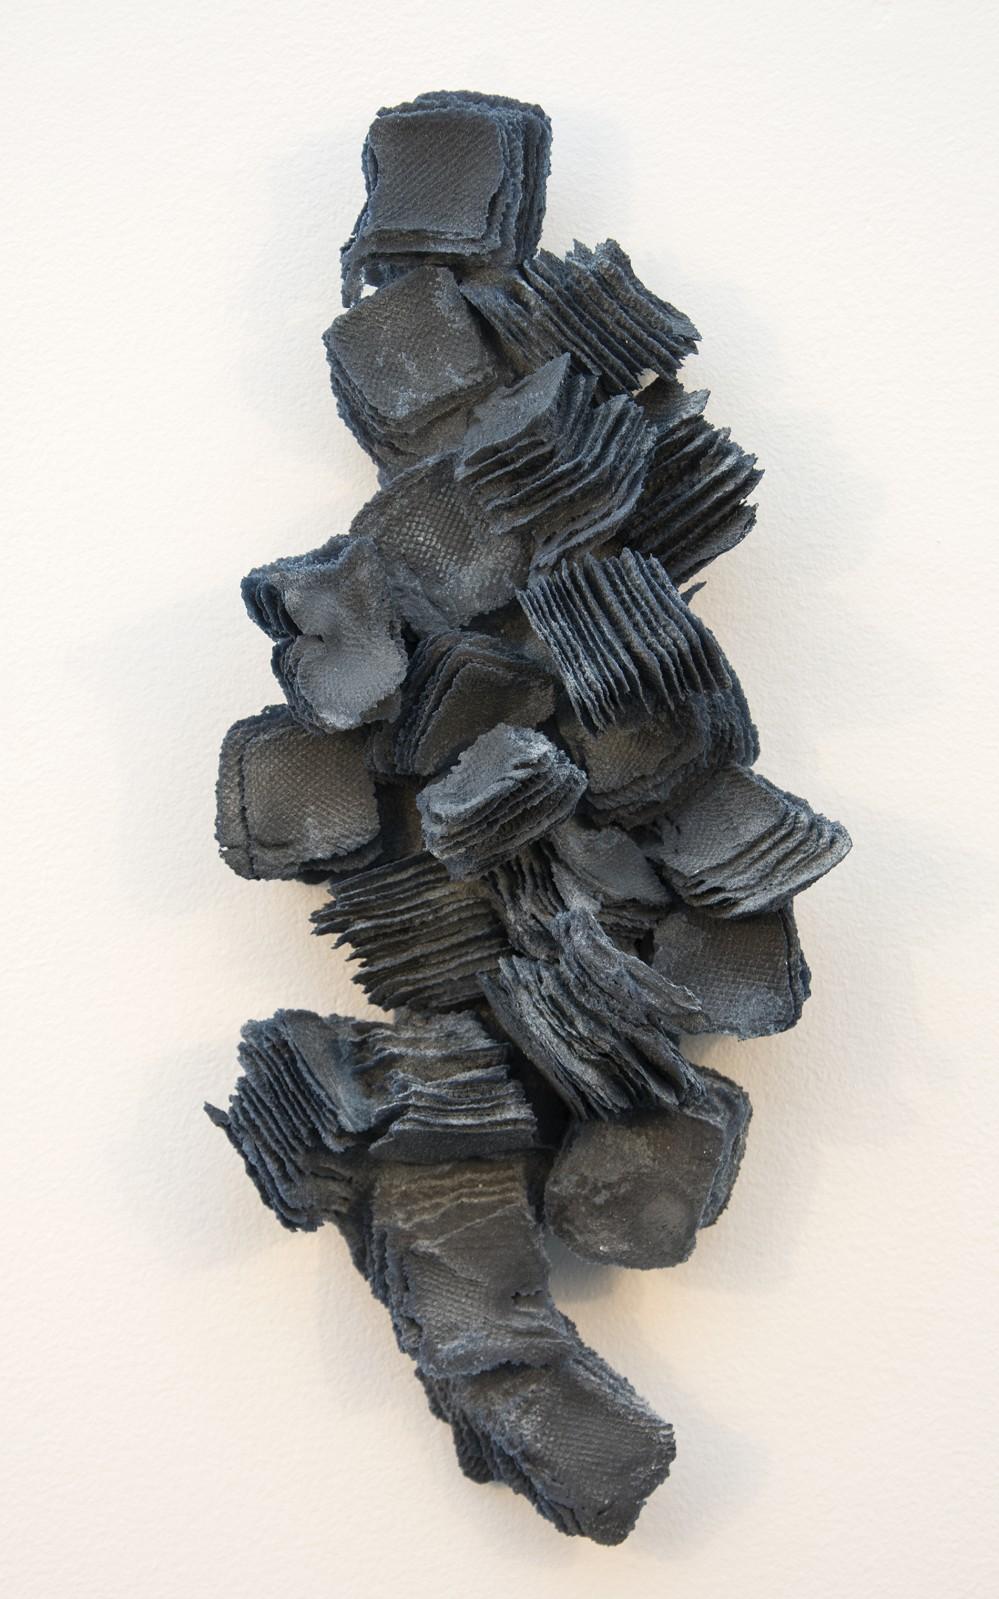 Cheryl Wilson Smith Abstract Sculpture - Weathered and Worn No. 1 - Textured Indigo Blue Glass Sculpted Wall Relief